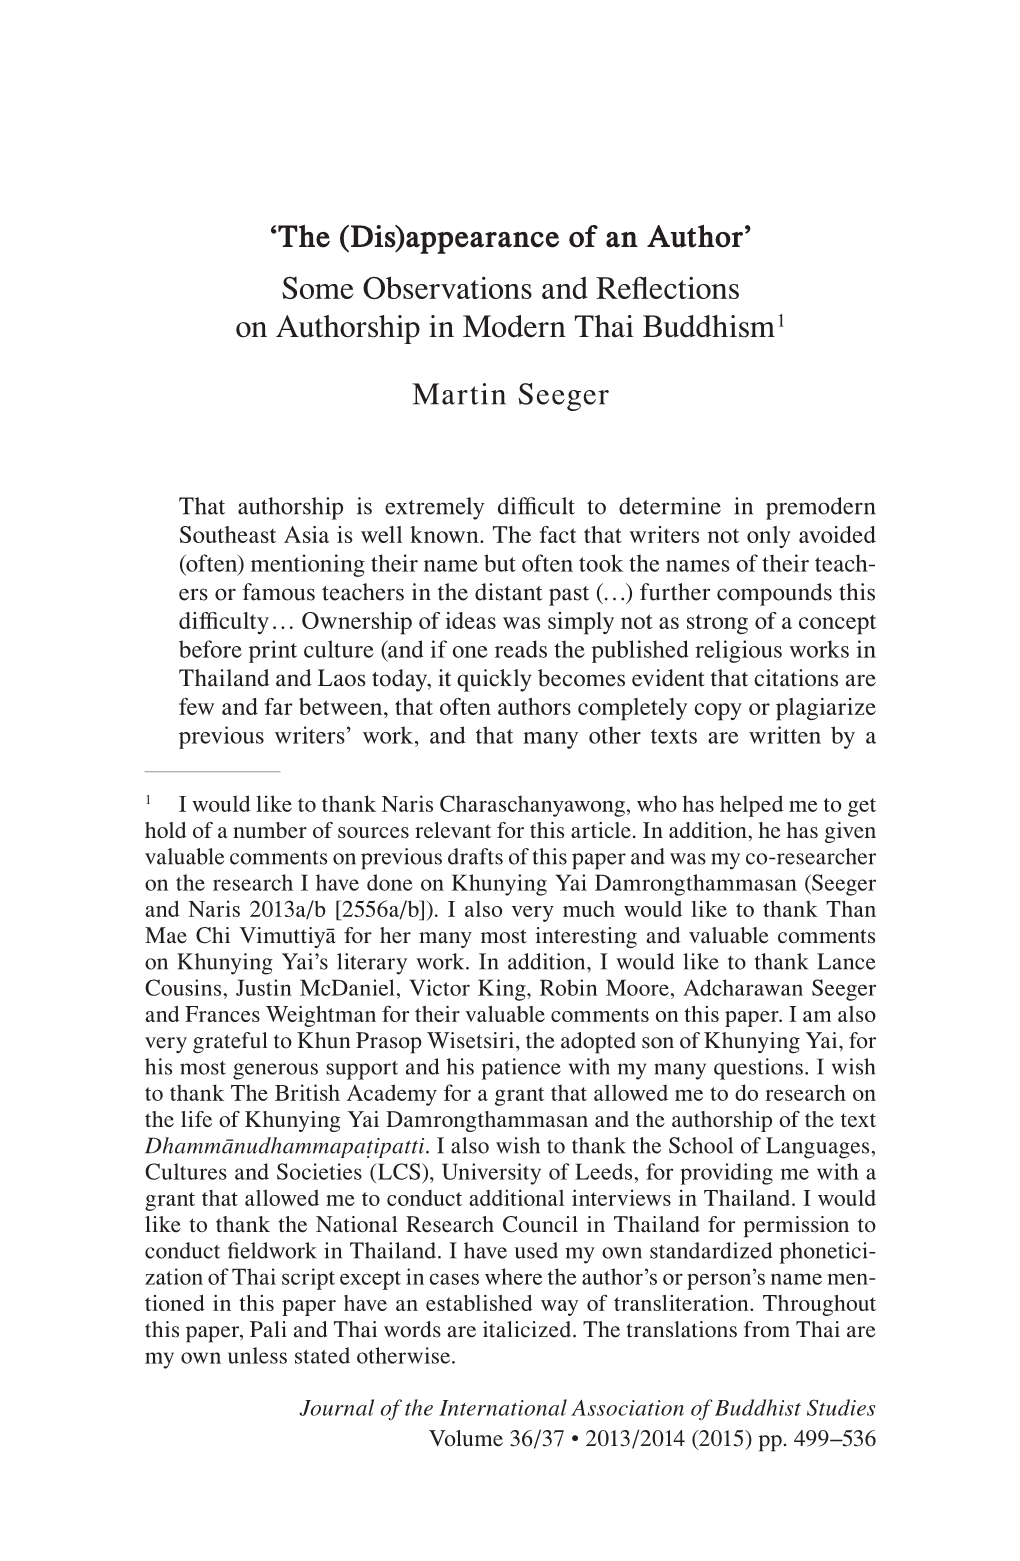 Some Observations and Reflections on Authorship in Modern Thai Buddhism 1